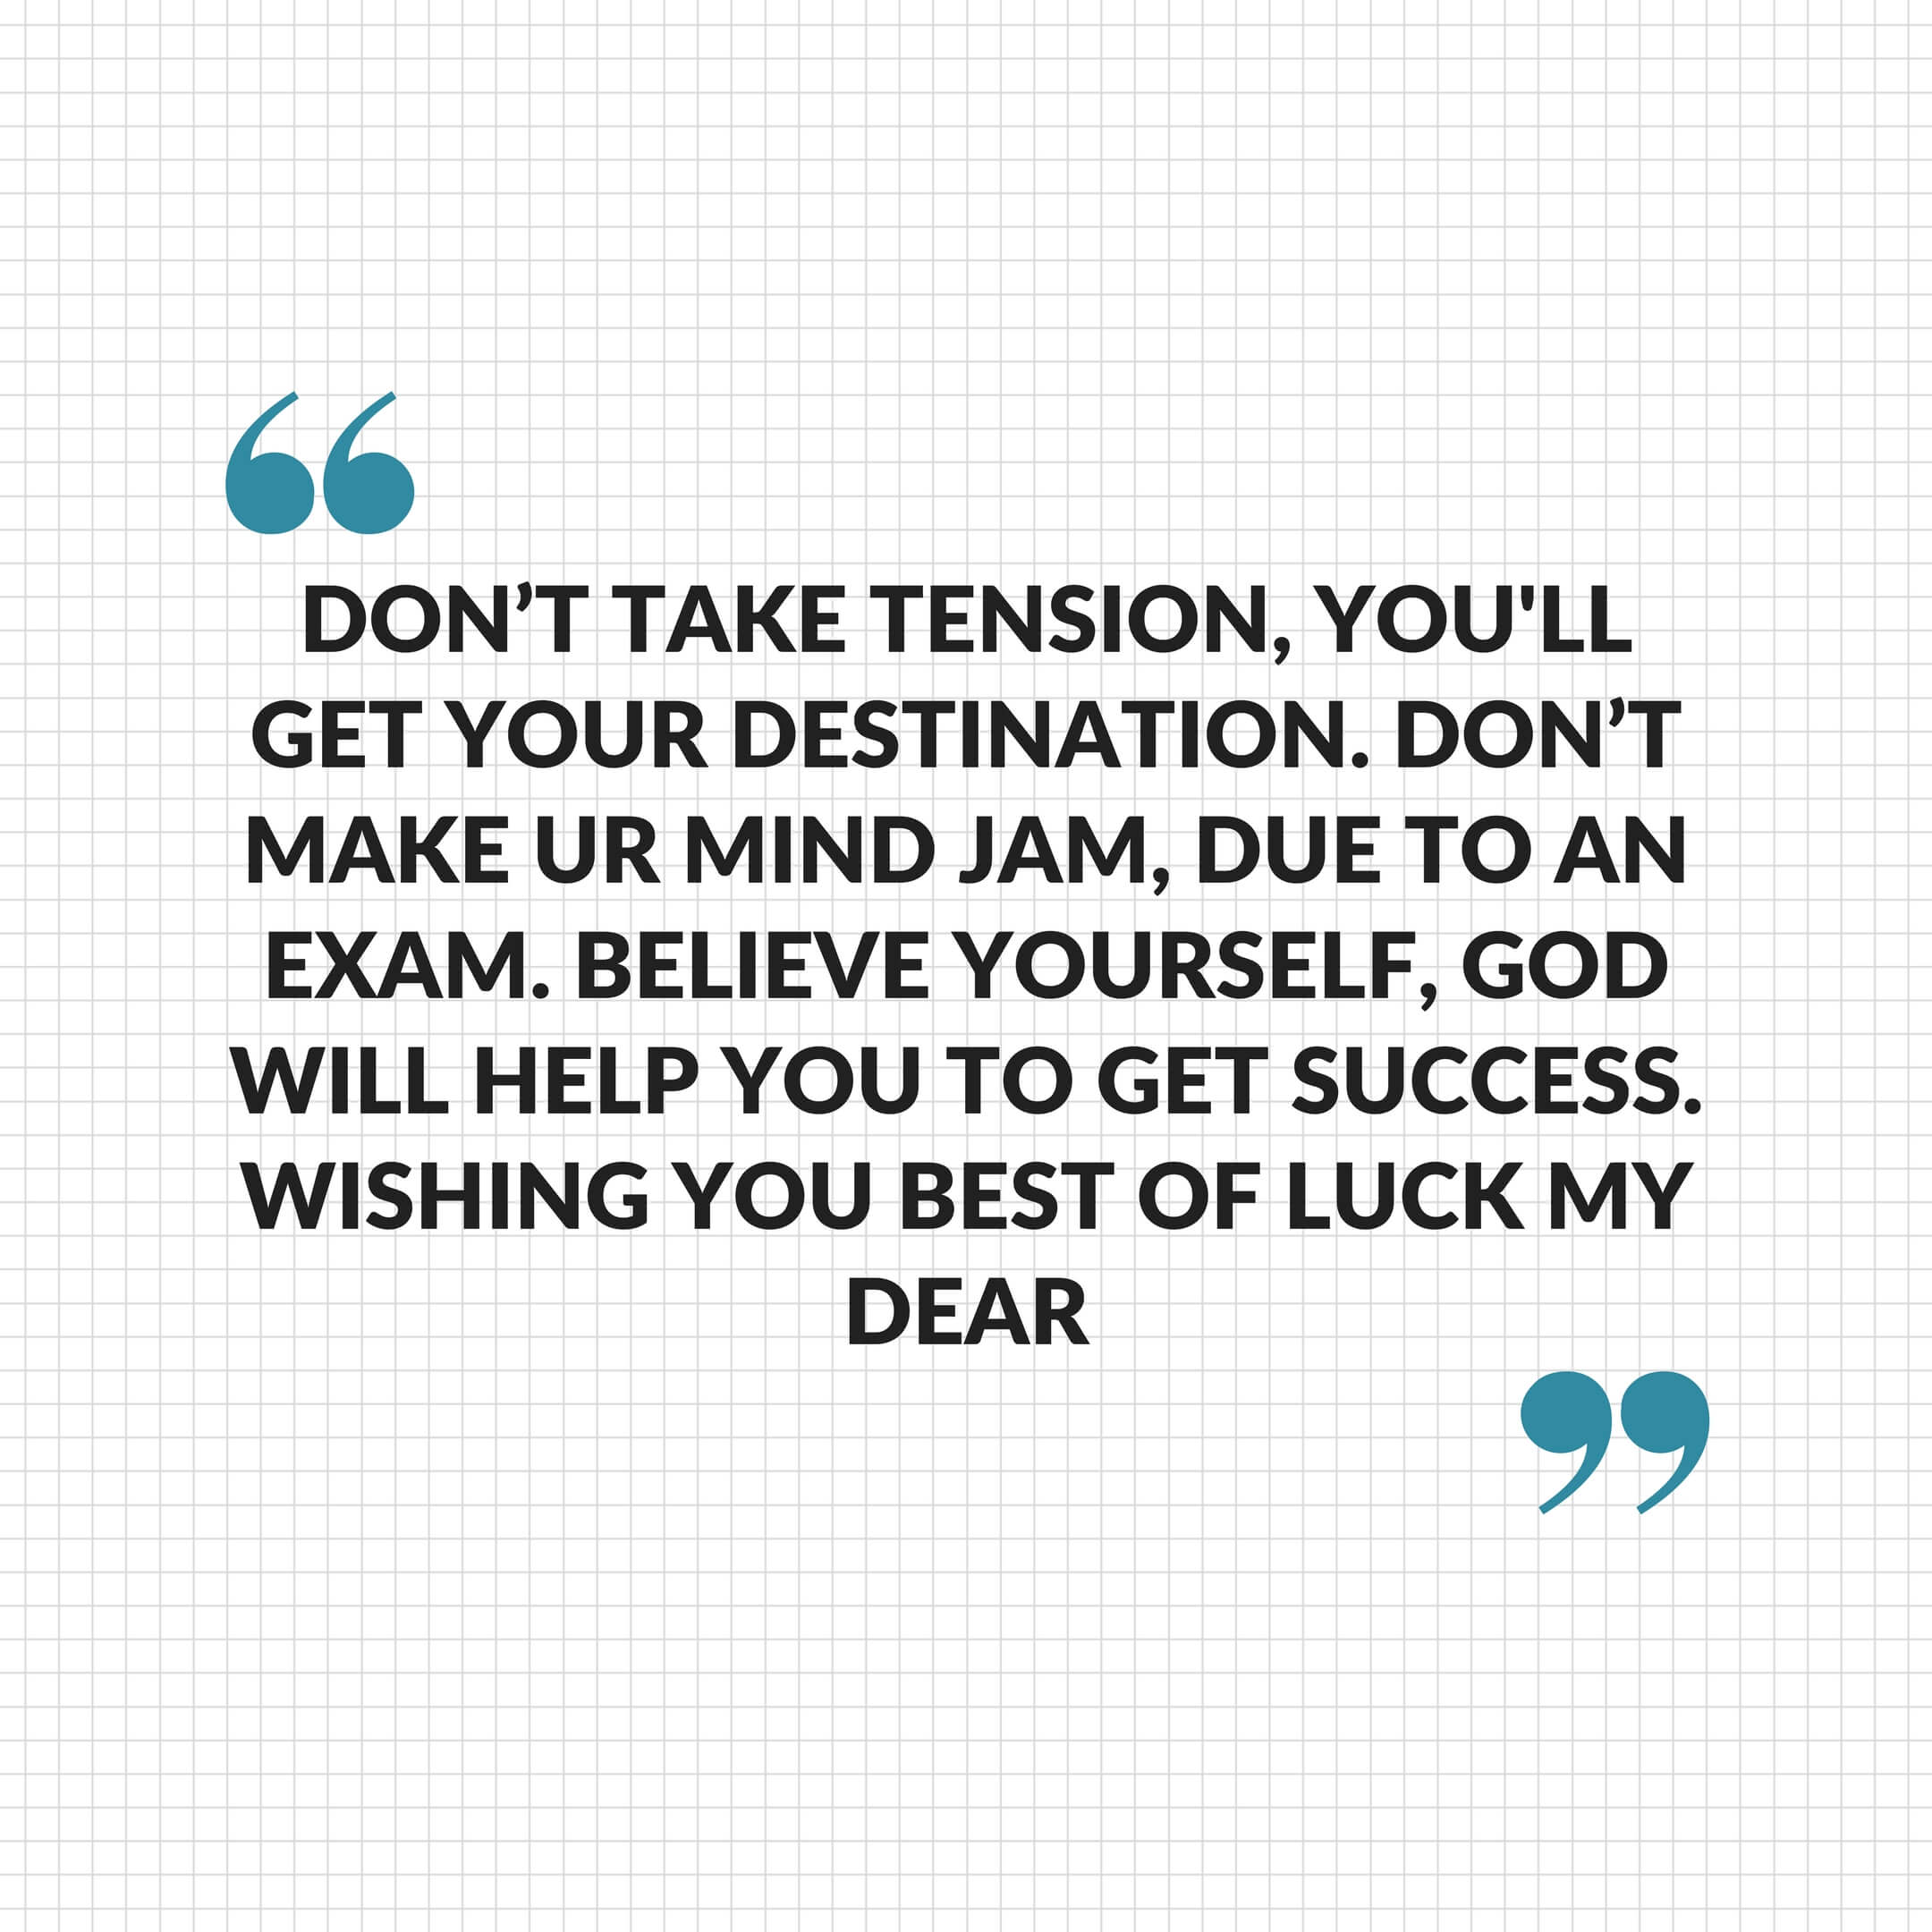 Don't take tension, u'll get ur destination. Don't make ur mind jam, due to exam. Believe urself, GOD will help you to get success. Wishing you best of luck my dear.......